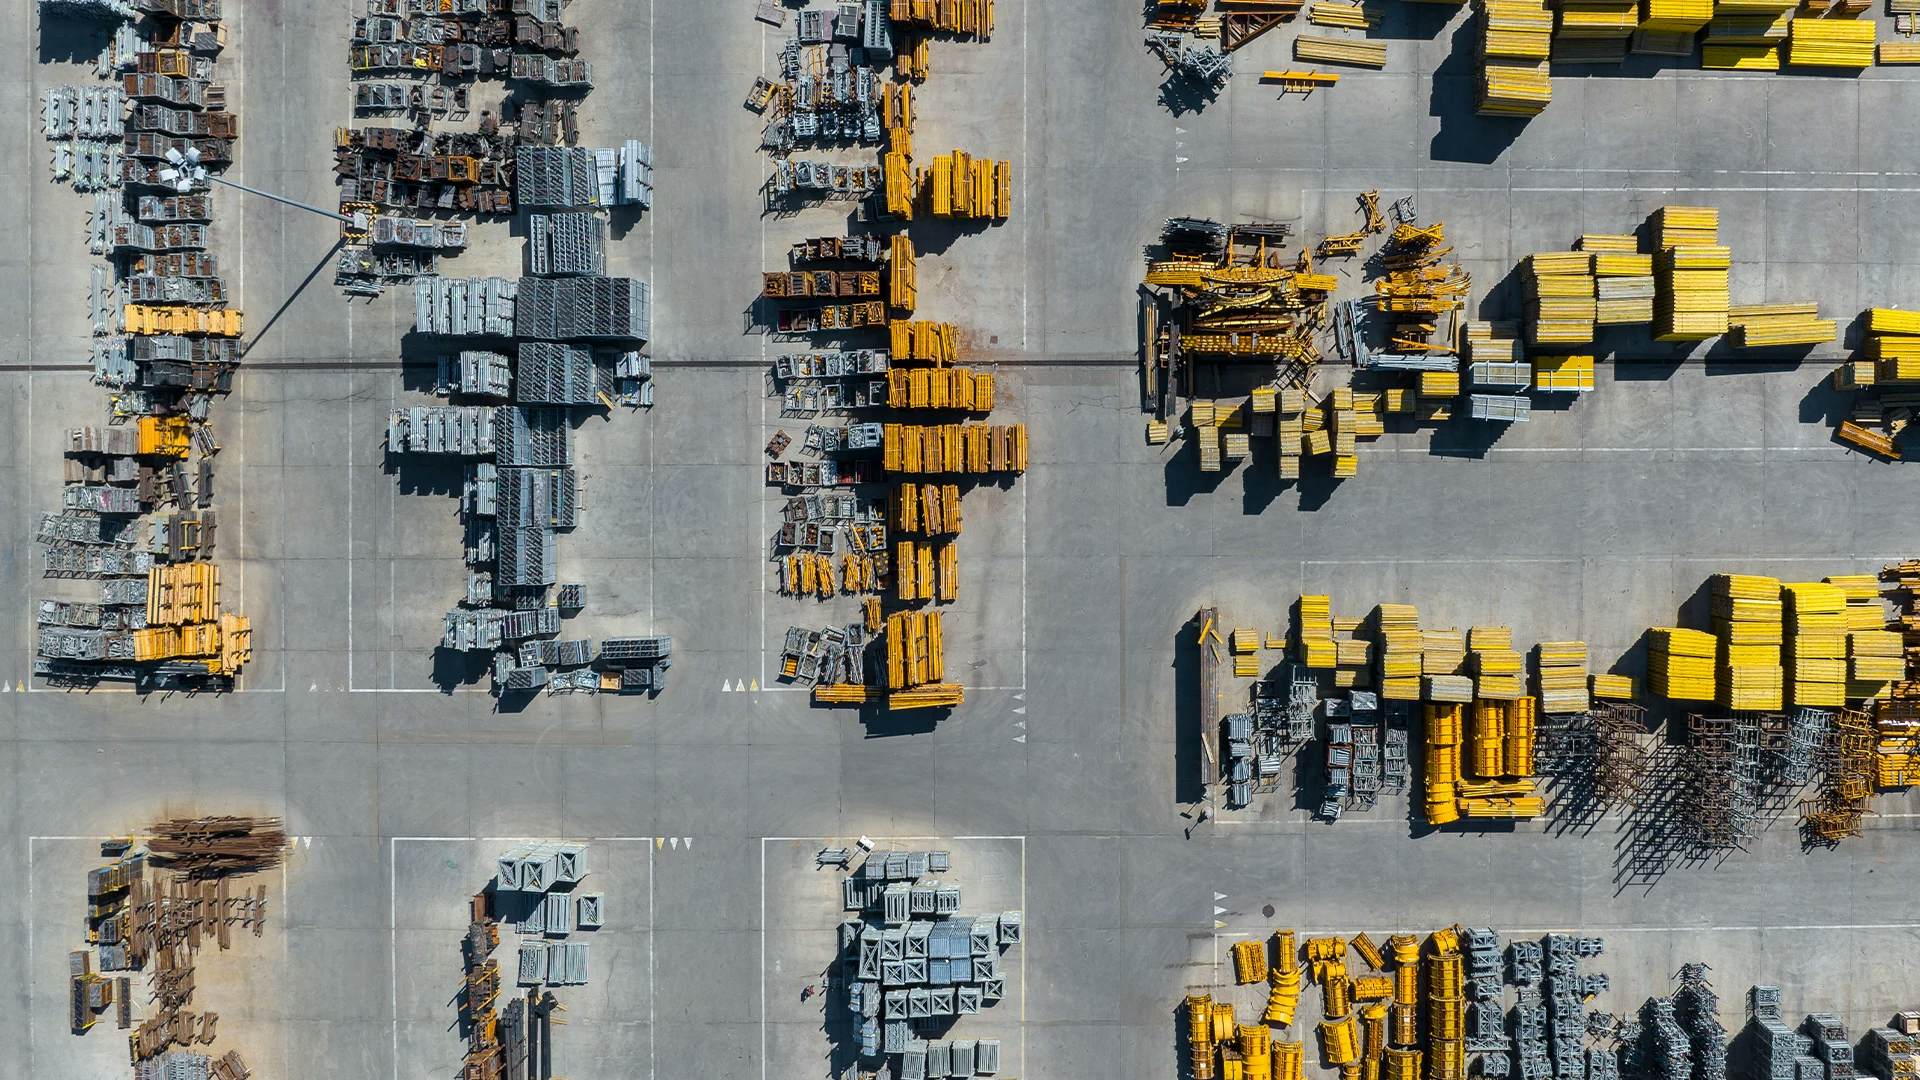 Aerial view of a construction yard with organized arrays of materials and machinery.